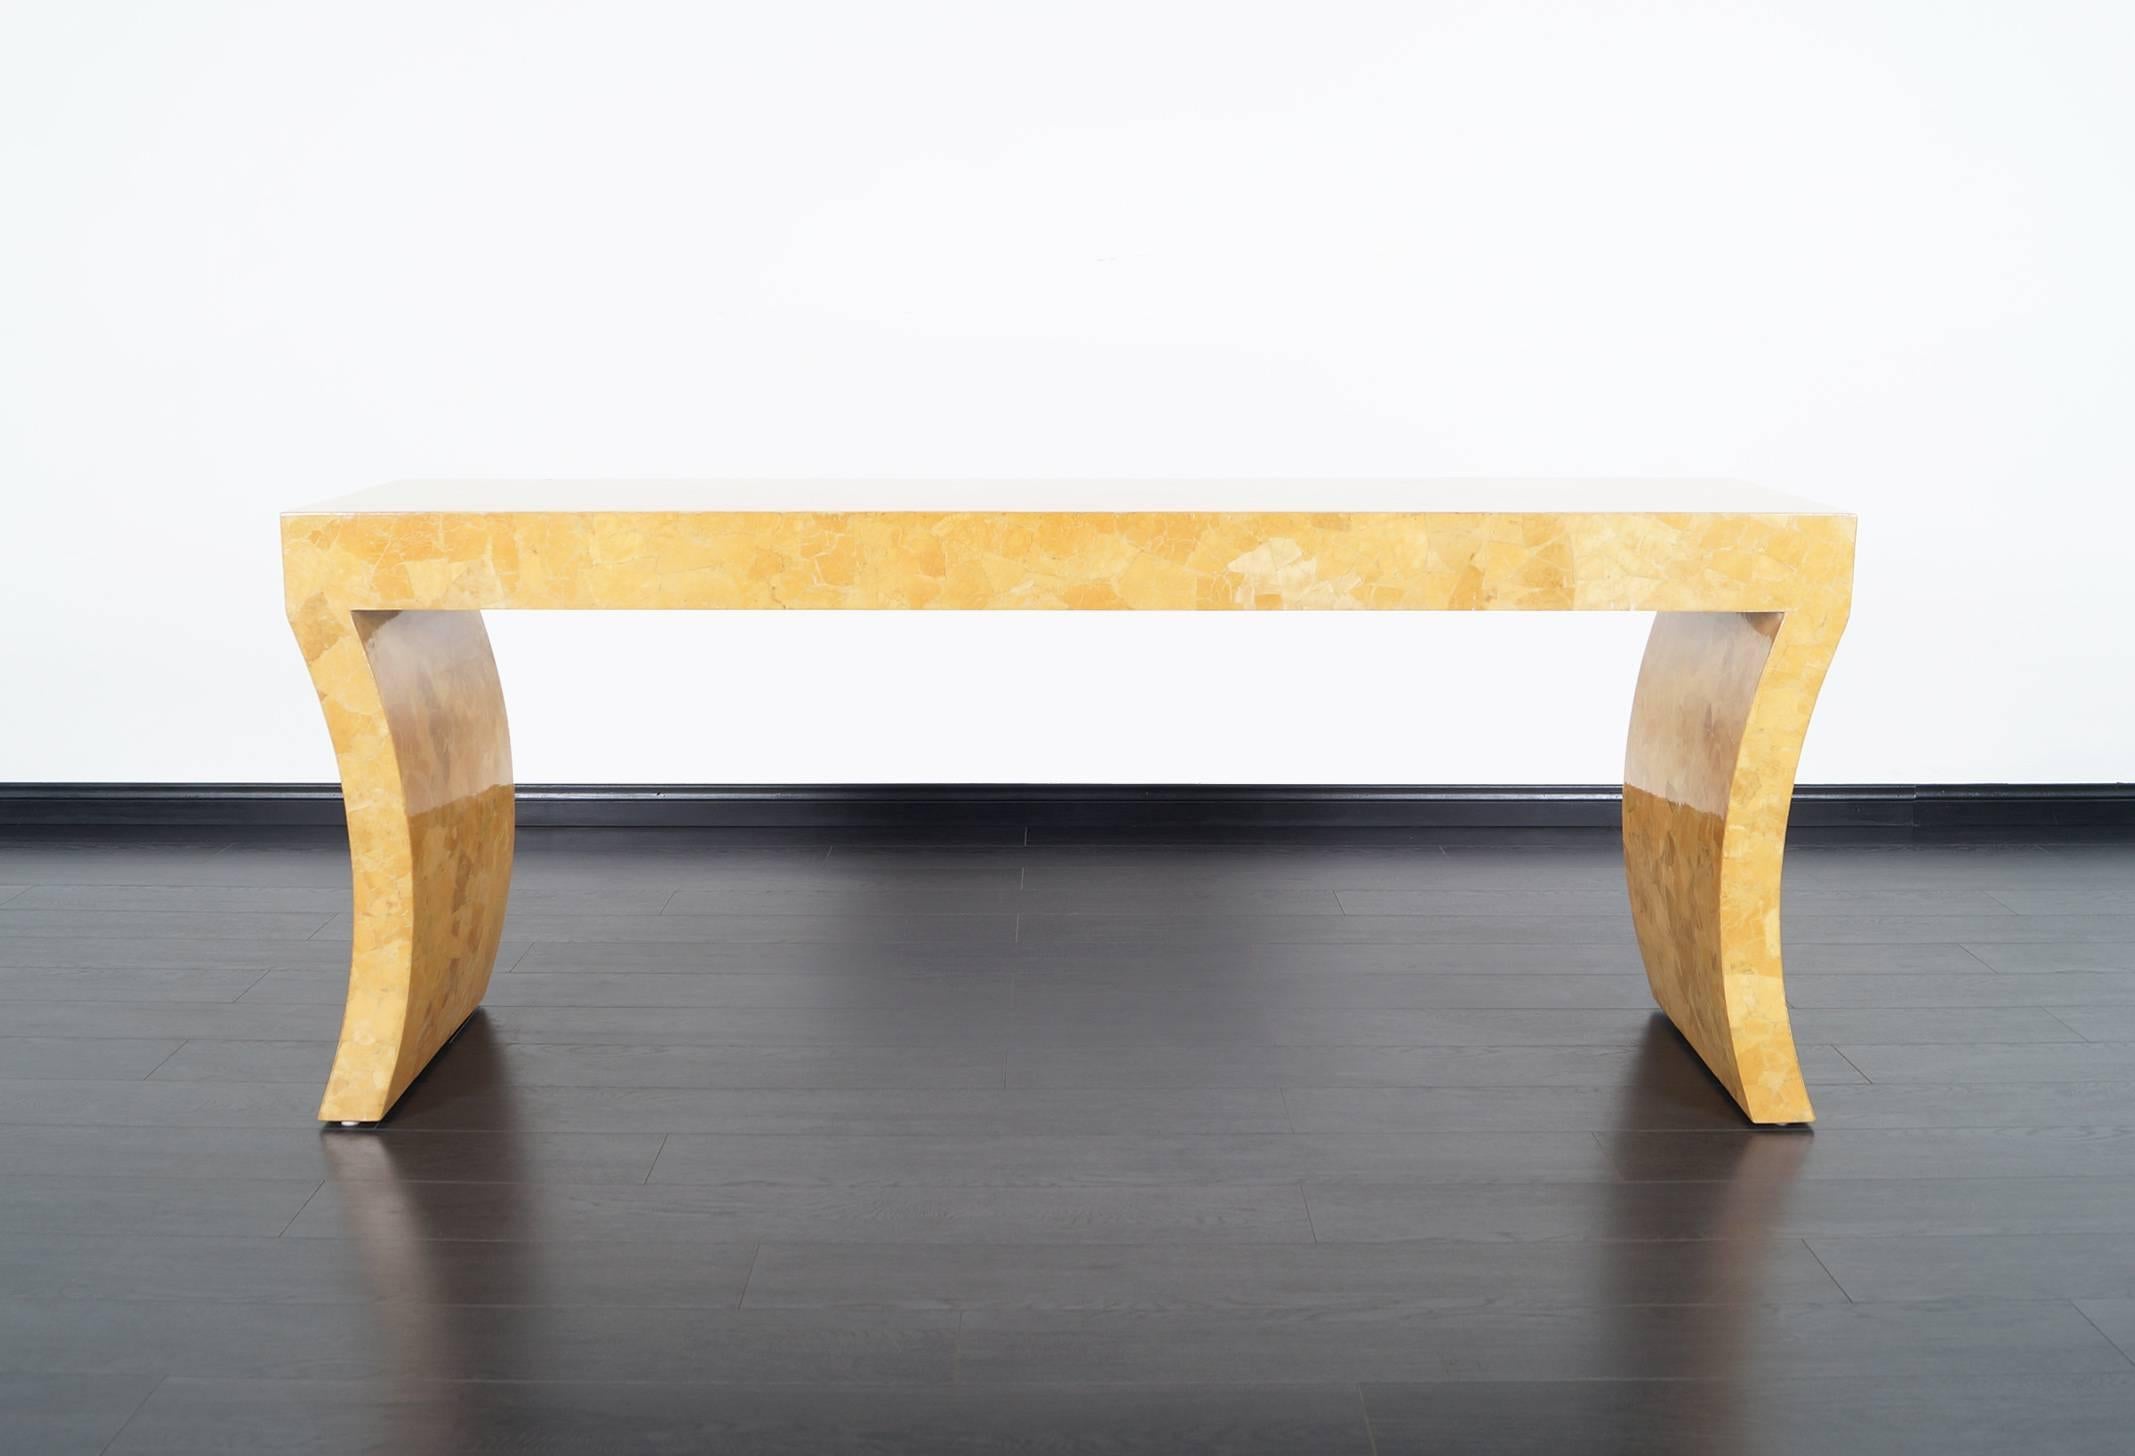 Extravagant vintage craquelure console table designed by Jimeco Interiors Ltda in Colombia, circa 1970s. This table features an innovative architectural design, the legs are shaped like two arched columns that connect to an elegant long top. Rarely